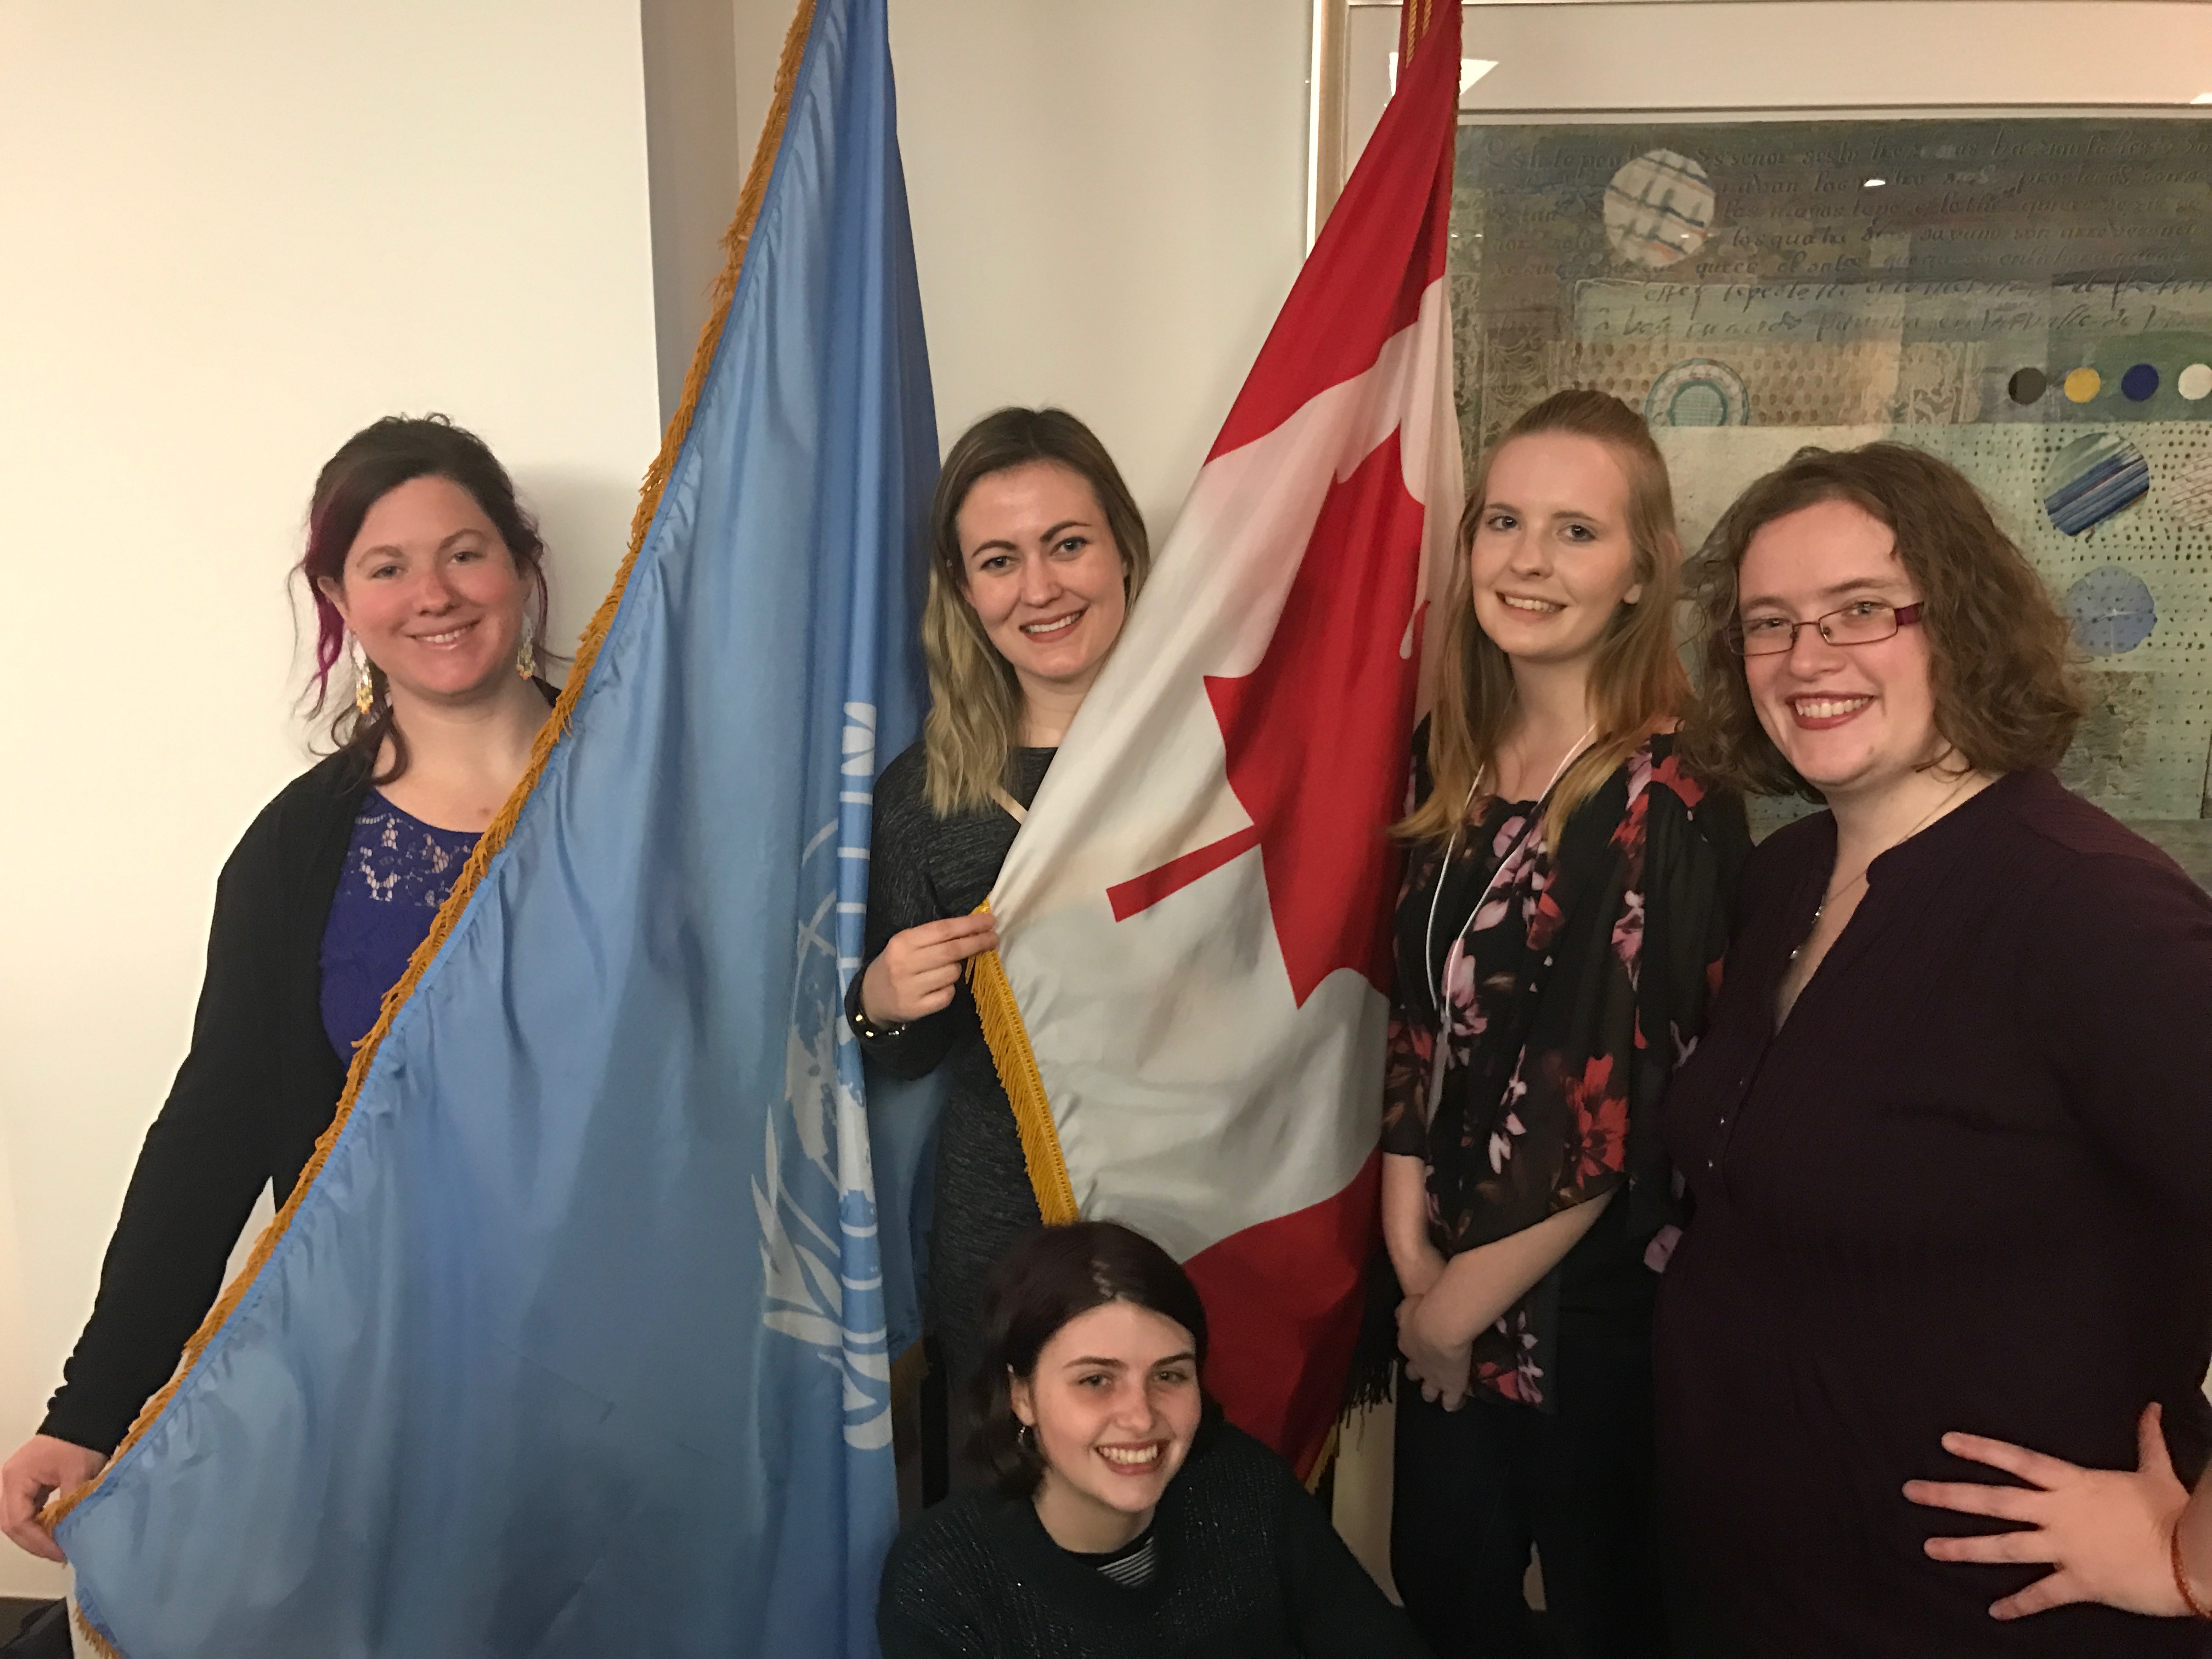 UN 5 Anglican Youth from Canada